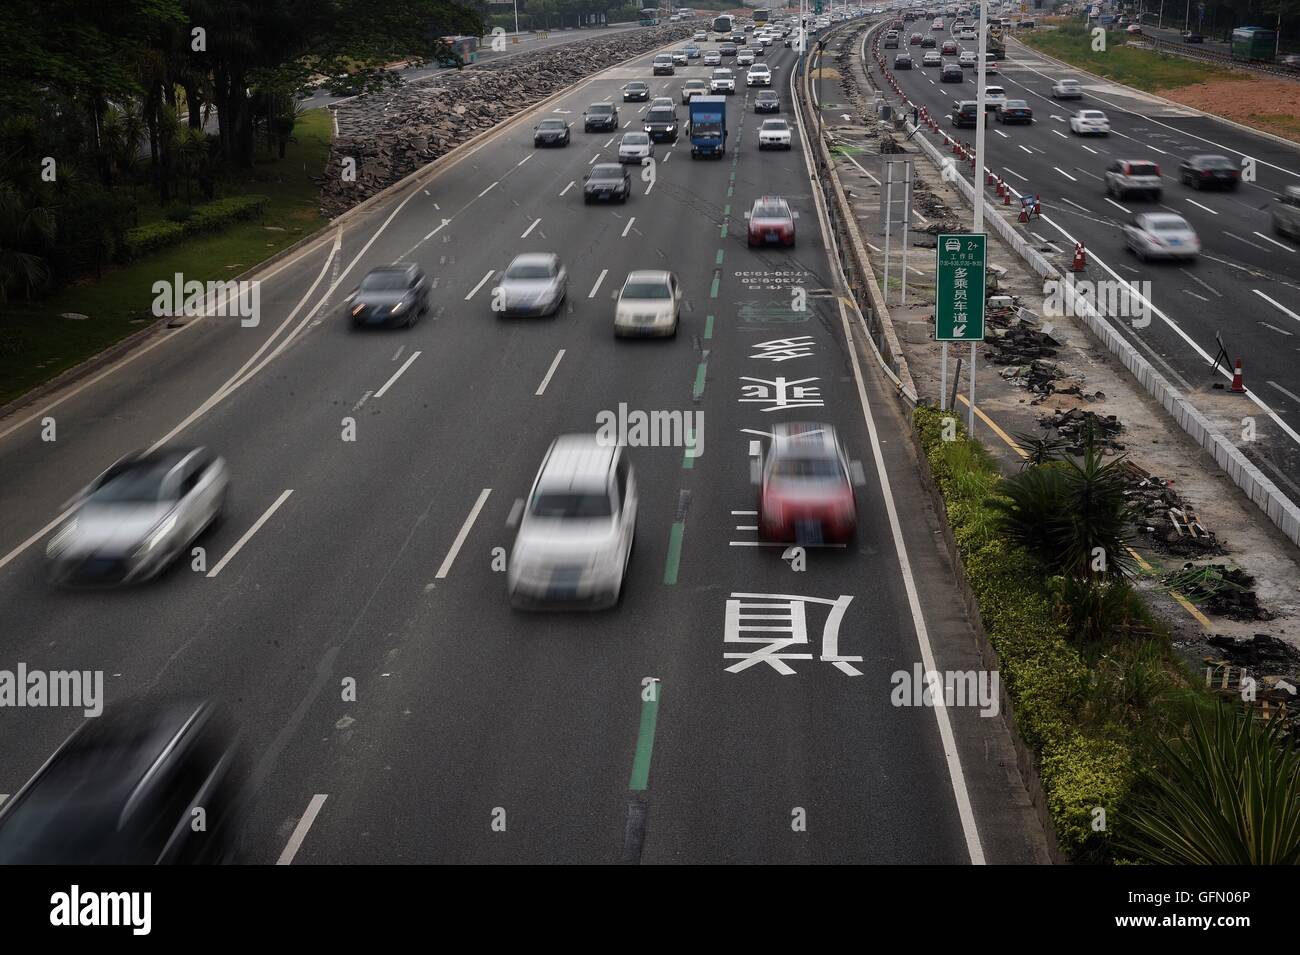 Shenzhen. 1st Aug, 2016. Photo taken on Aug. 1, 2016 shows a high-occupancy vehicle lane (HOV lane) in Shenzhen, south China's Guangdong Province. Shenzhen's first HOV lane was put into use on Monday to increase average vehicle occupancy with the goal of reducing traffic congestion and air pollution. © Mao Siqian/Xinhua/Alamy Live News Stock Photo